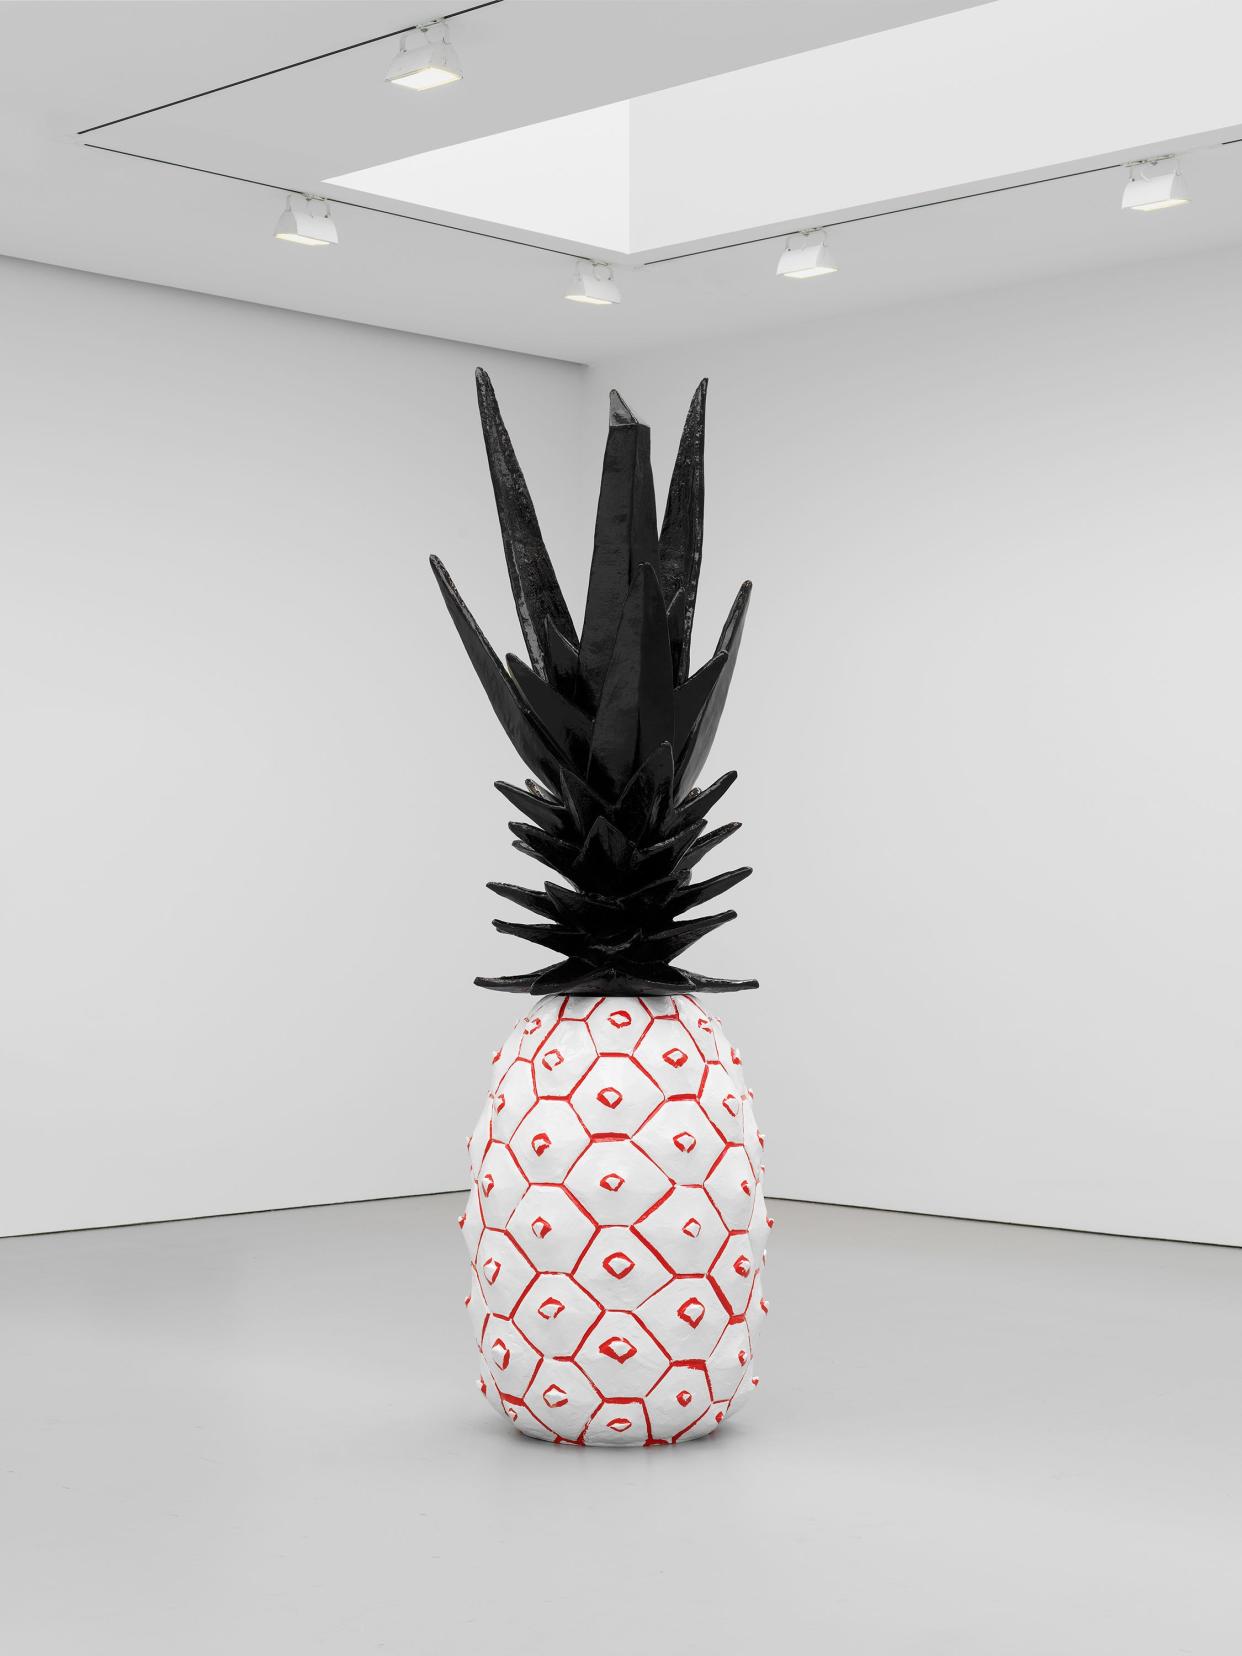 'Pineapple' is among the three sculptures on display at the Norton Museum of Art.